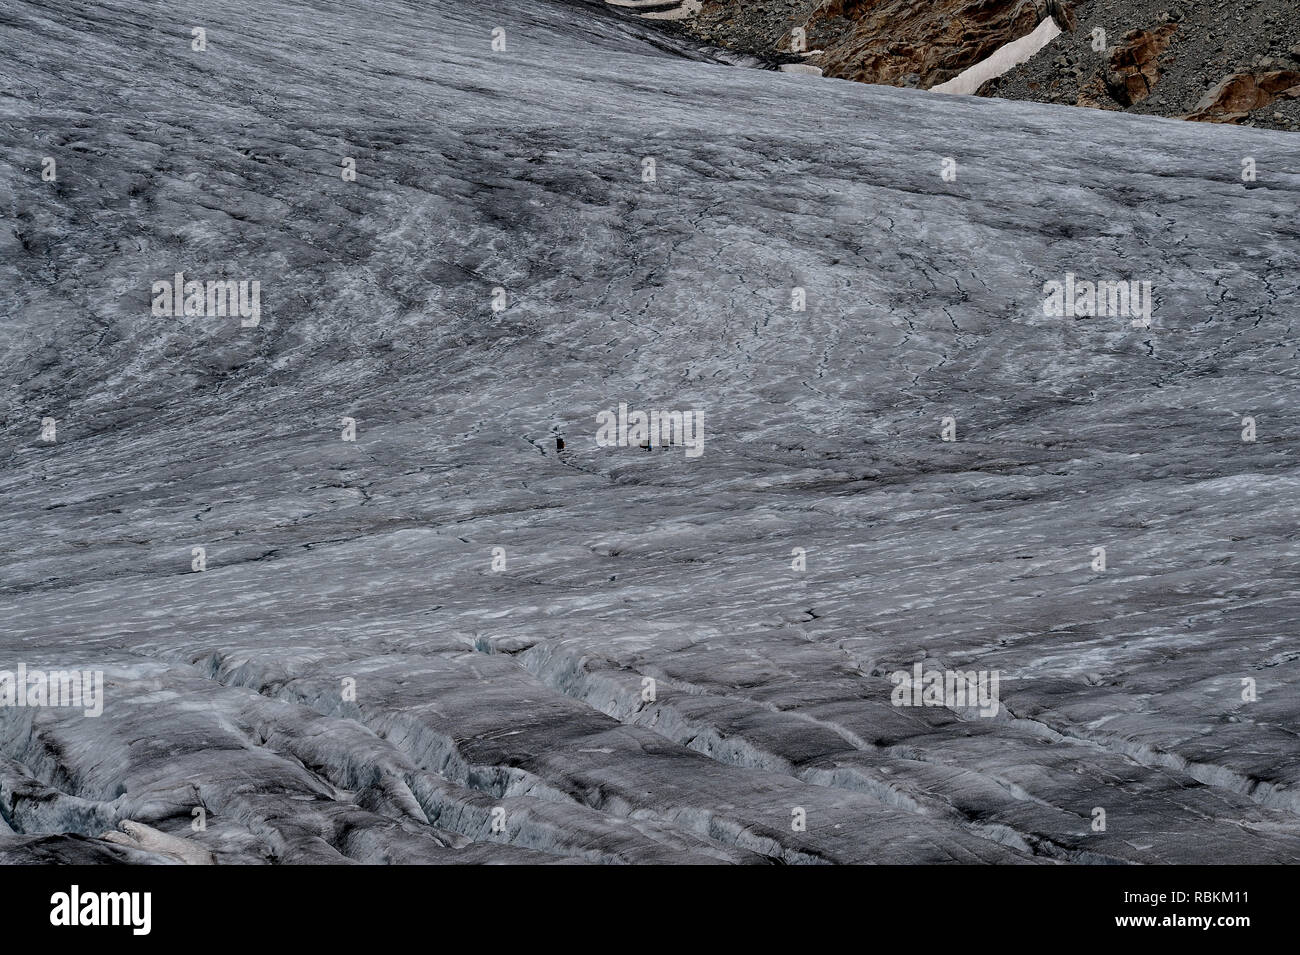 Rhône Glacier, Valais canton, Switzerland: scientists use measuring instruments far out on the glacier to assess faster melting due to global warming. Stock Photo